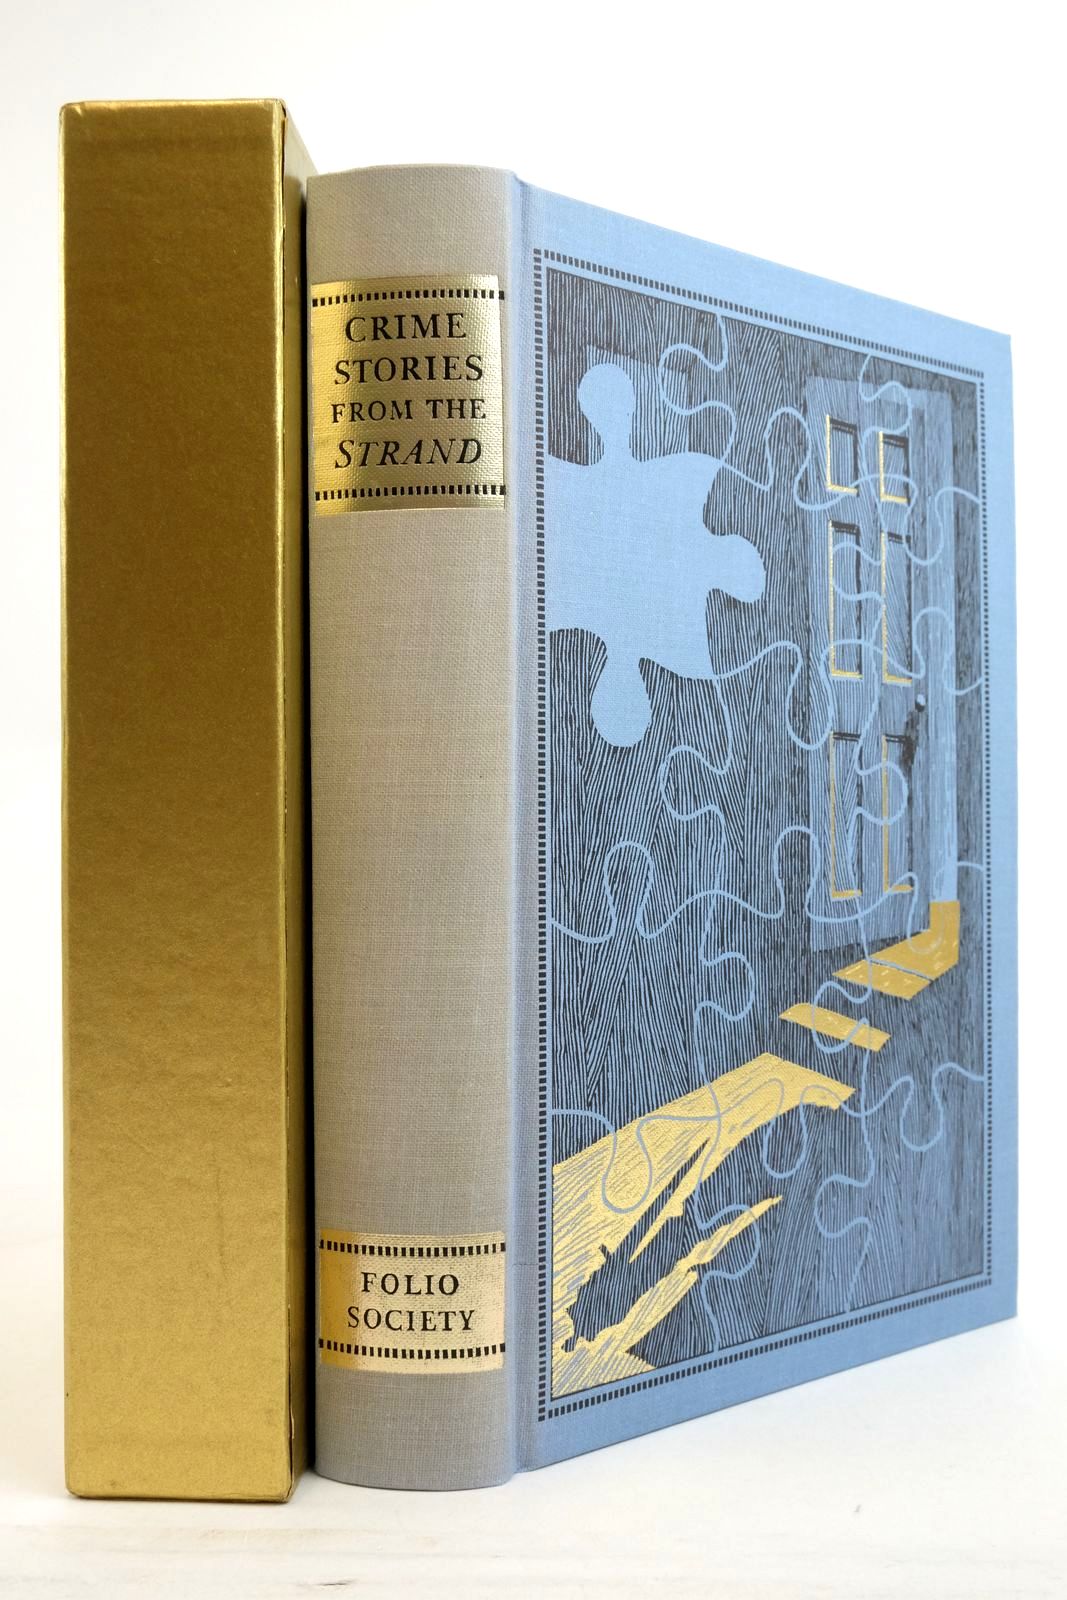 Photo of CRIME STORIES FROM THE 'STRAND' written by Beare, Geraldine Keating, H.R.F. illustrated by Eccles, David published by Folio Society (STOCK CODE: 2136542)  for sale by Stella & Rose's Books